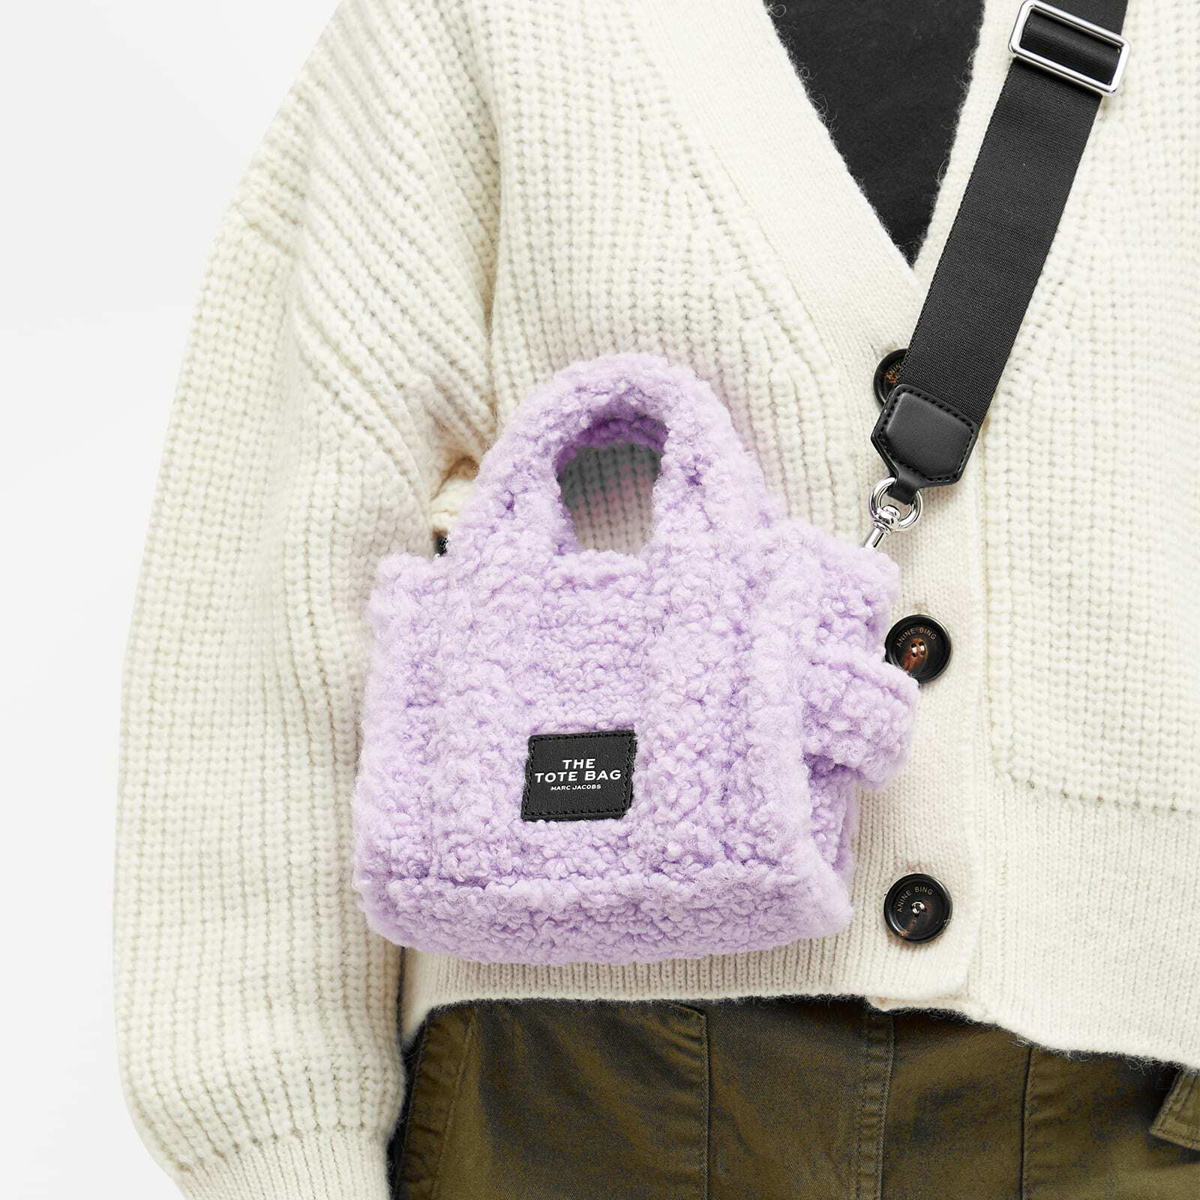 Marc Jacobs Women's The Teddy Micro Tote in Lilac Marc Jacobs